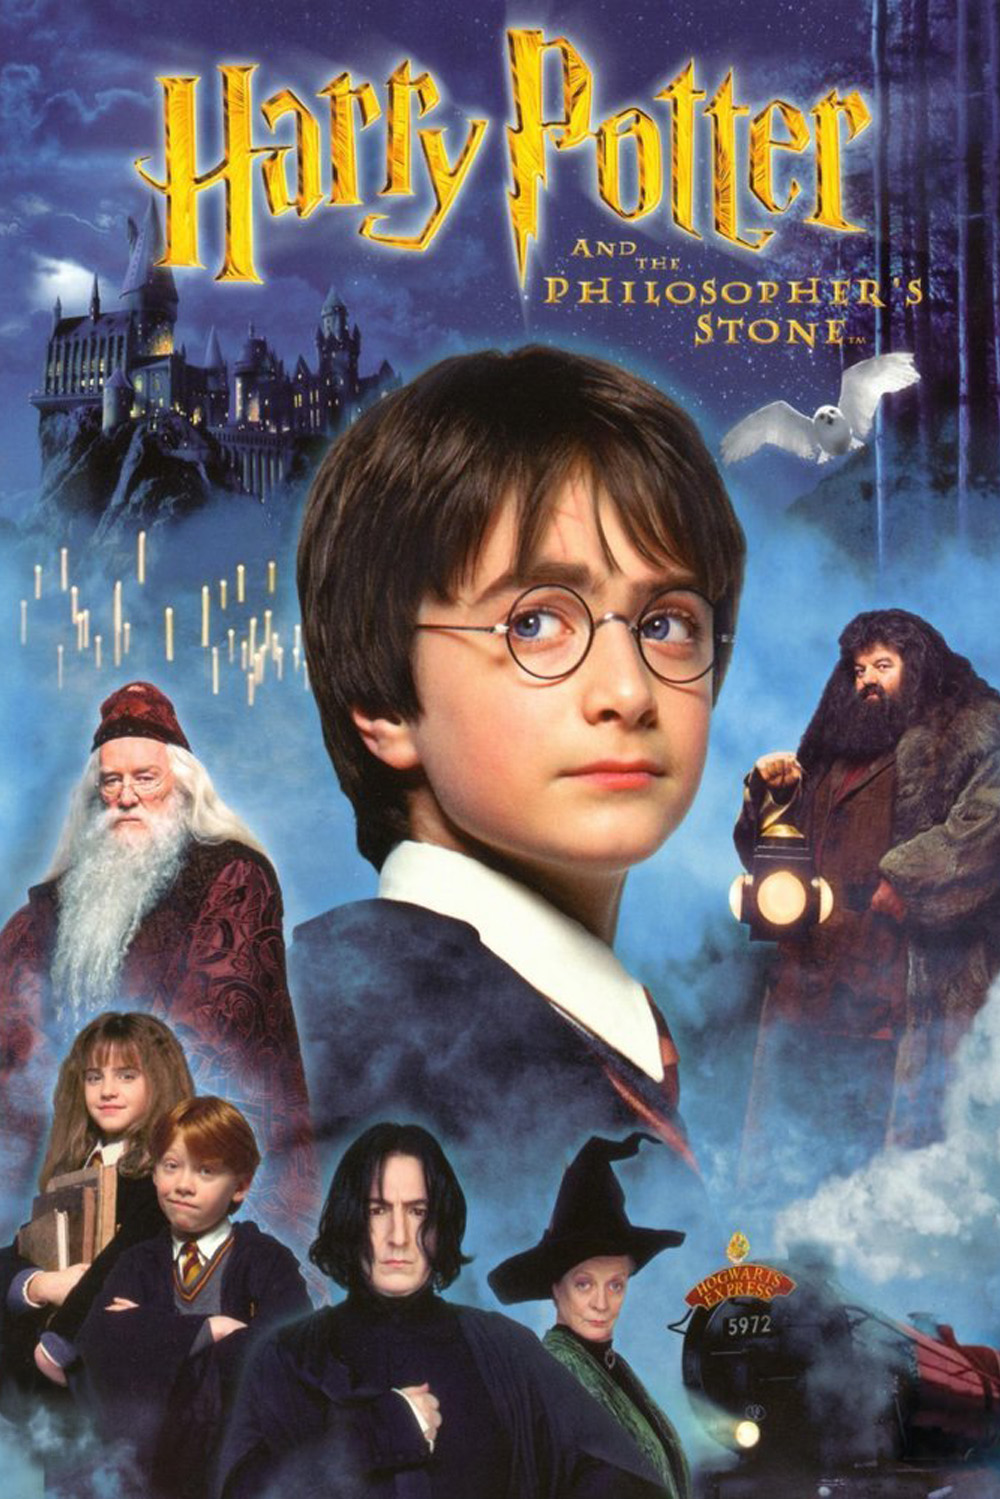 Harry Potter And The Philosopher's Stone #21